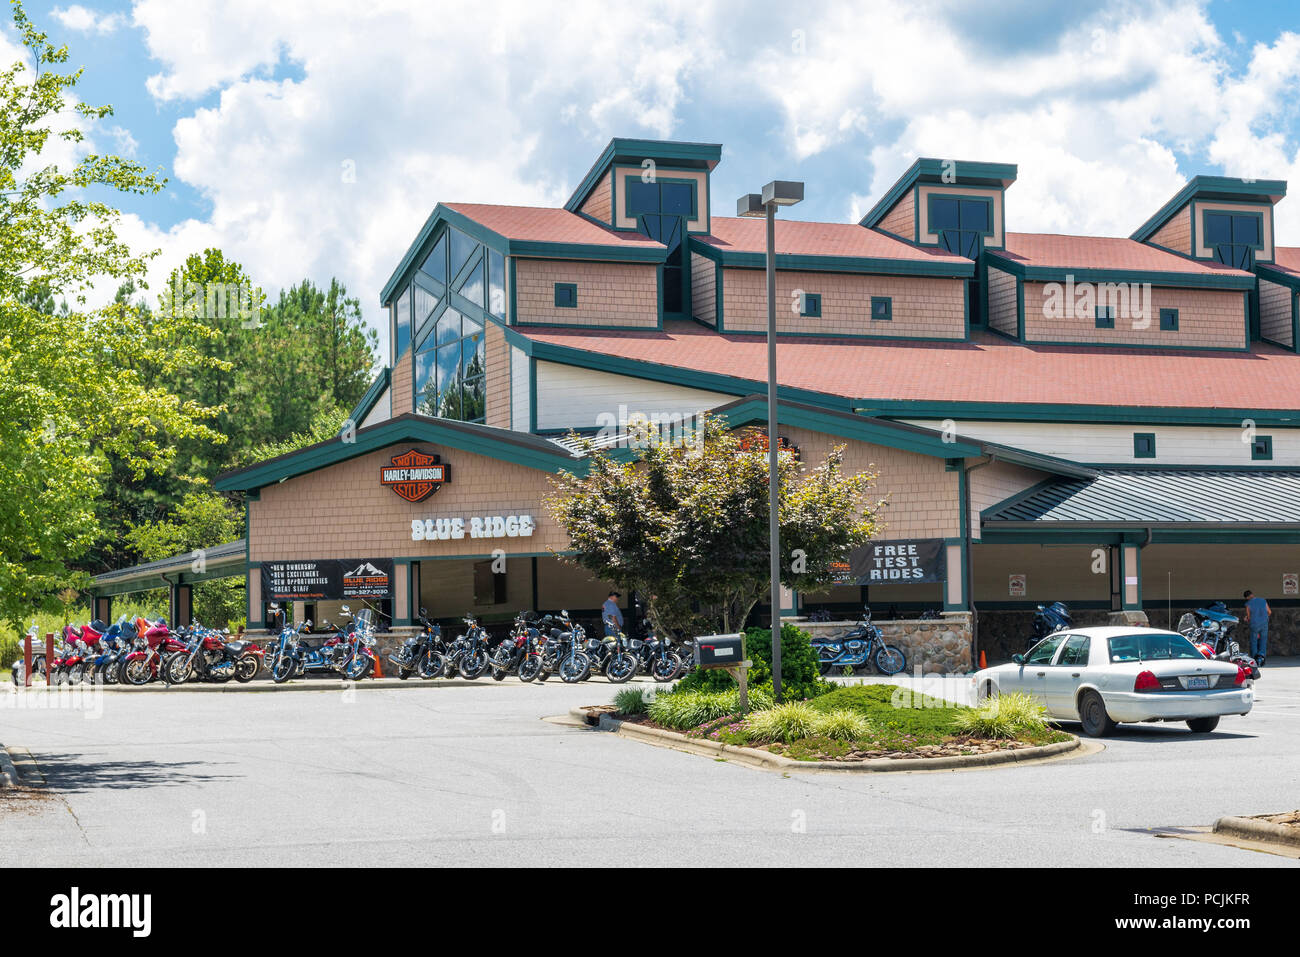 Hickory Nc Usa 26 July 18 Blue Ridge Harley Davidson Is A Local Retailer Of Motorycles And Accessories Stock Photo Alamy